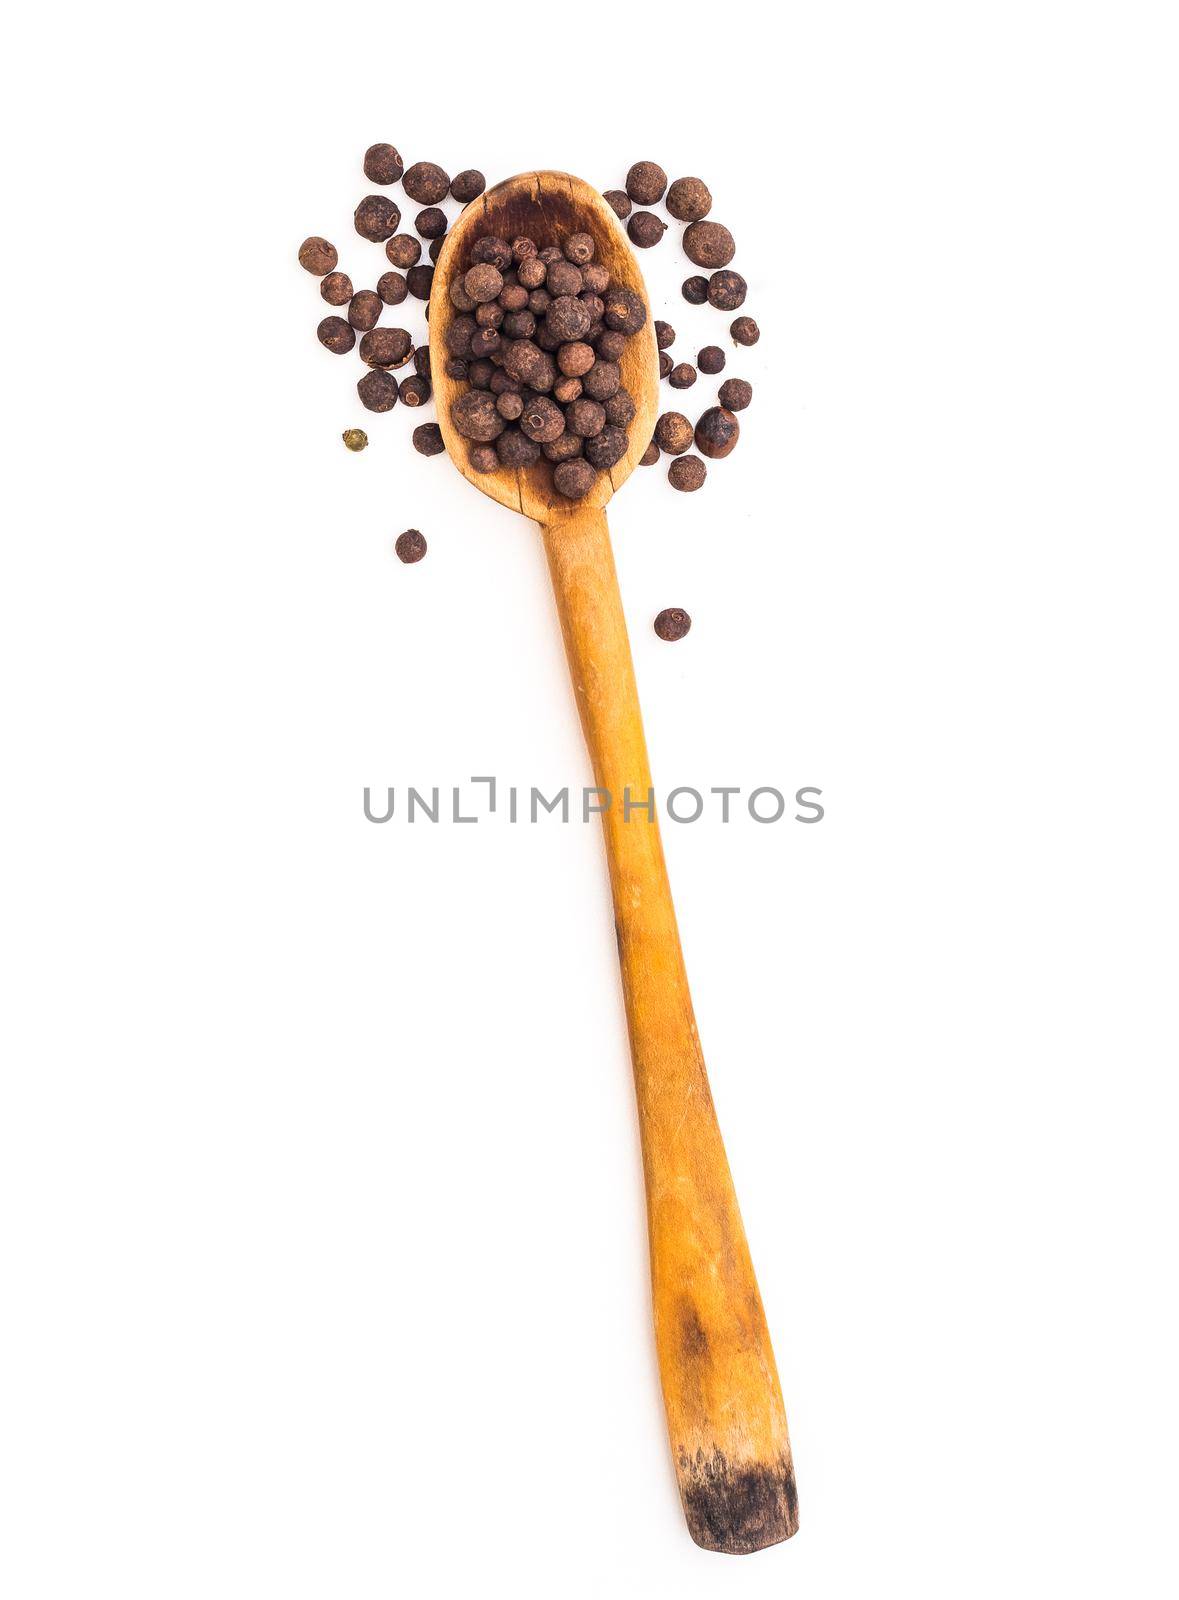 black pepper in a wooden spoon isolated on a white background